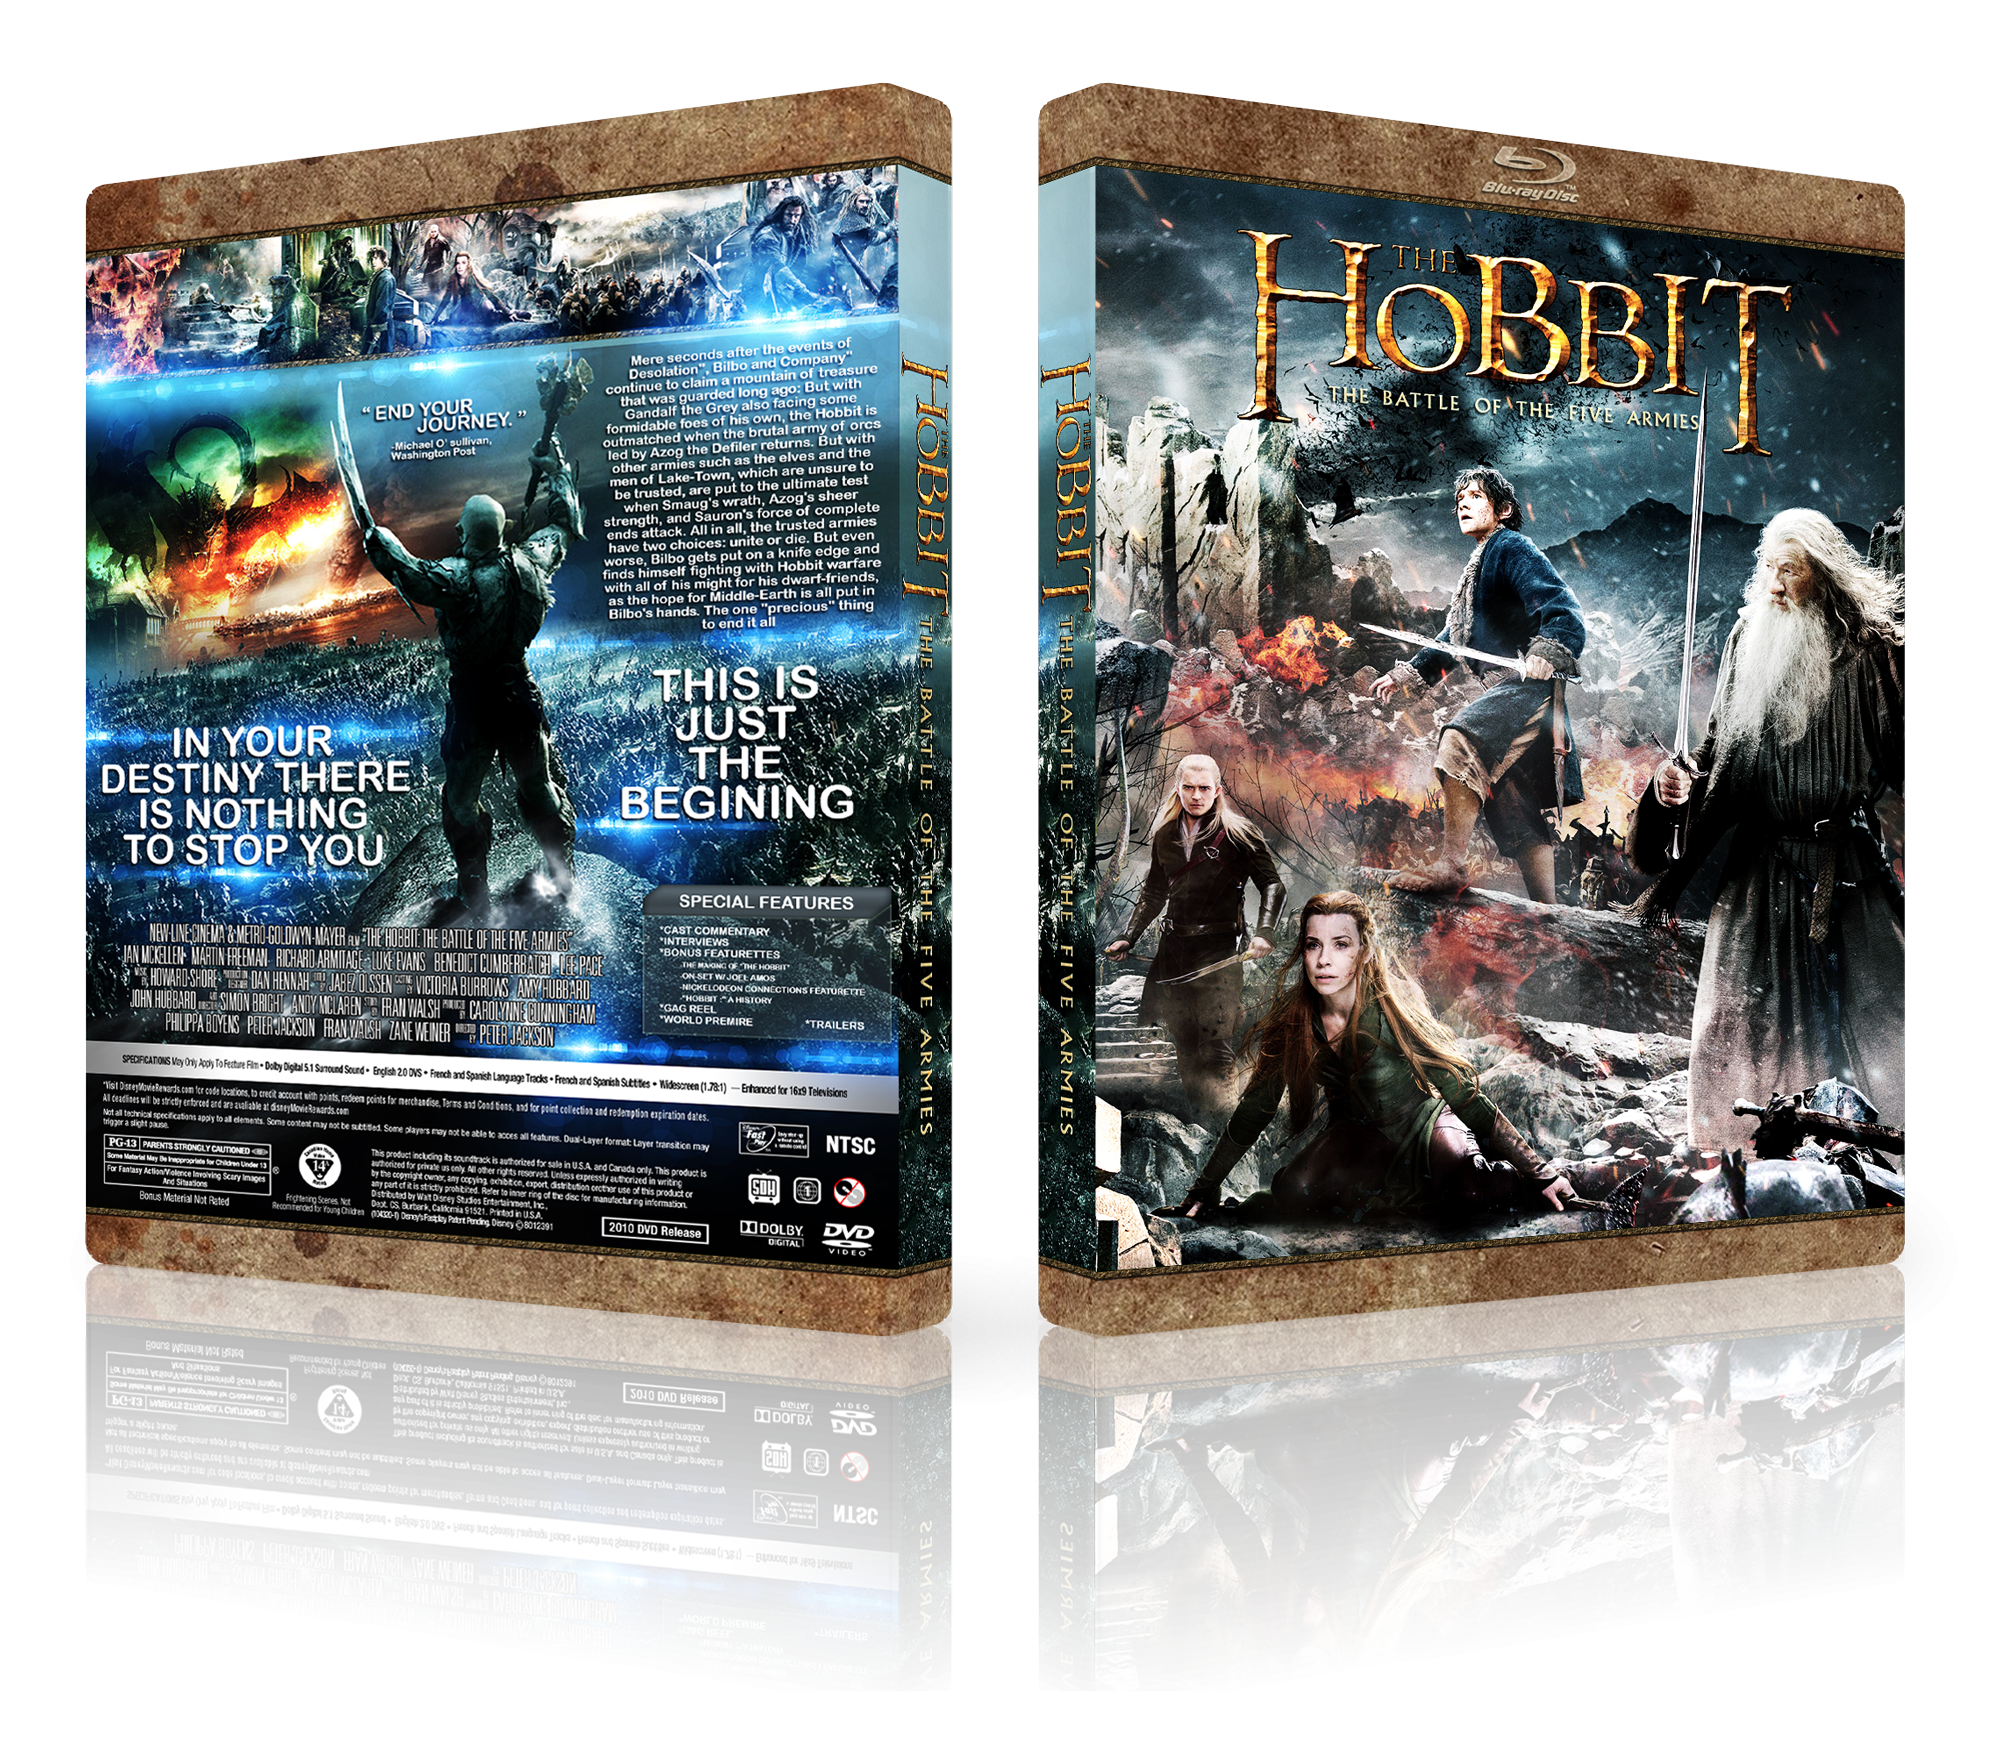 The Hobbit: The Battle of The Five Armies box cover